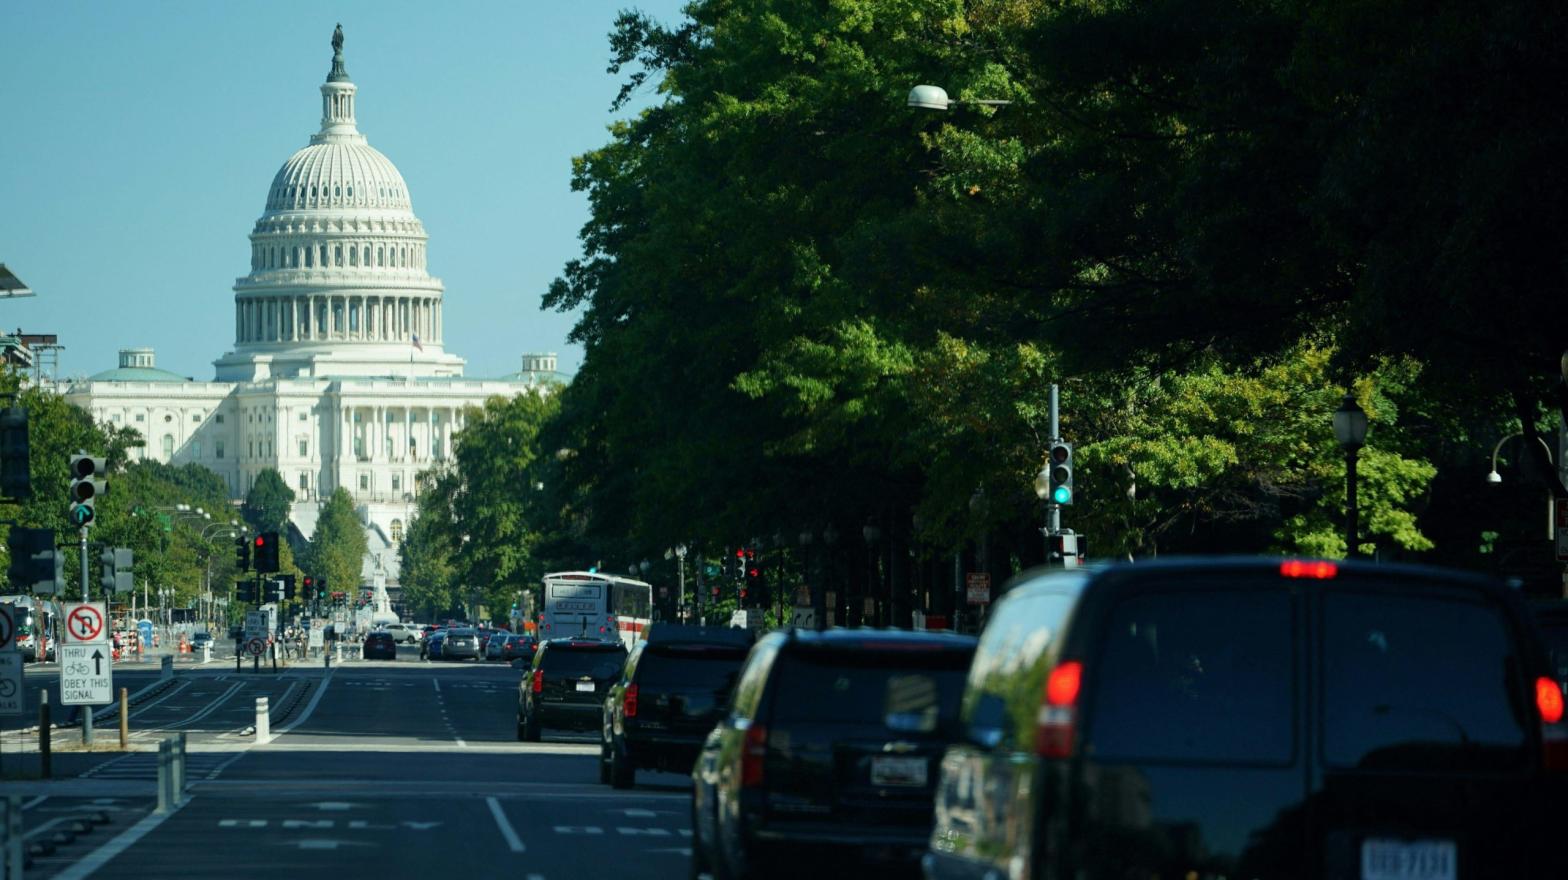 A motorcade carrying President Joe Biden to the U.S. Capitol in Washington, D.C. on Oct. 1, 2021; used here as stock photo. (Photo: Mandel Ngan / AFP, Getty Images)